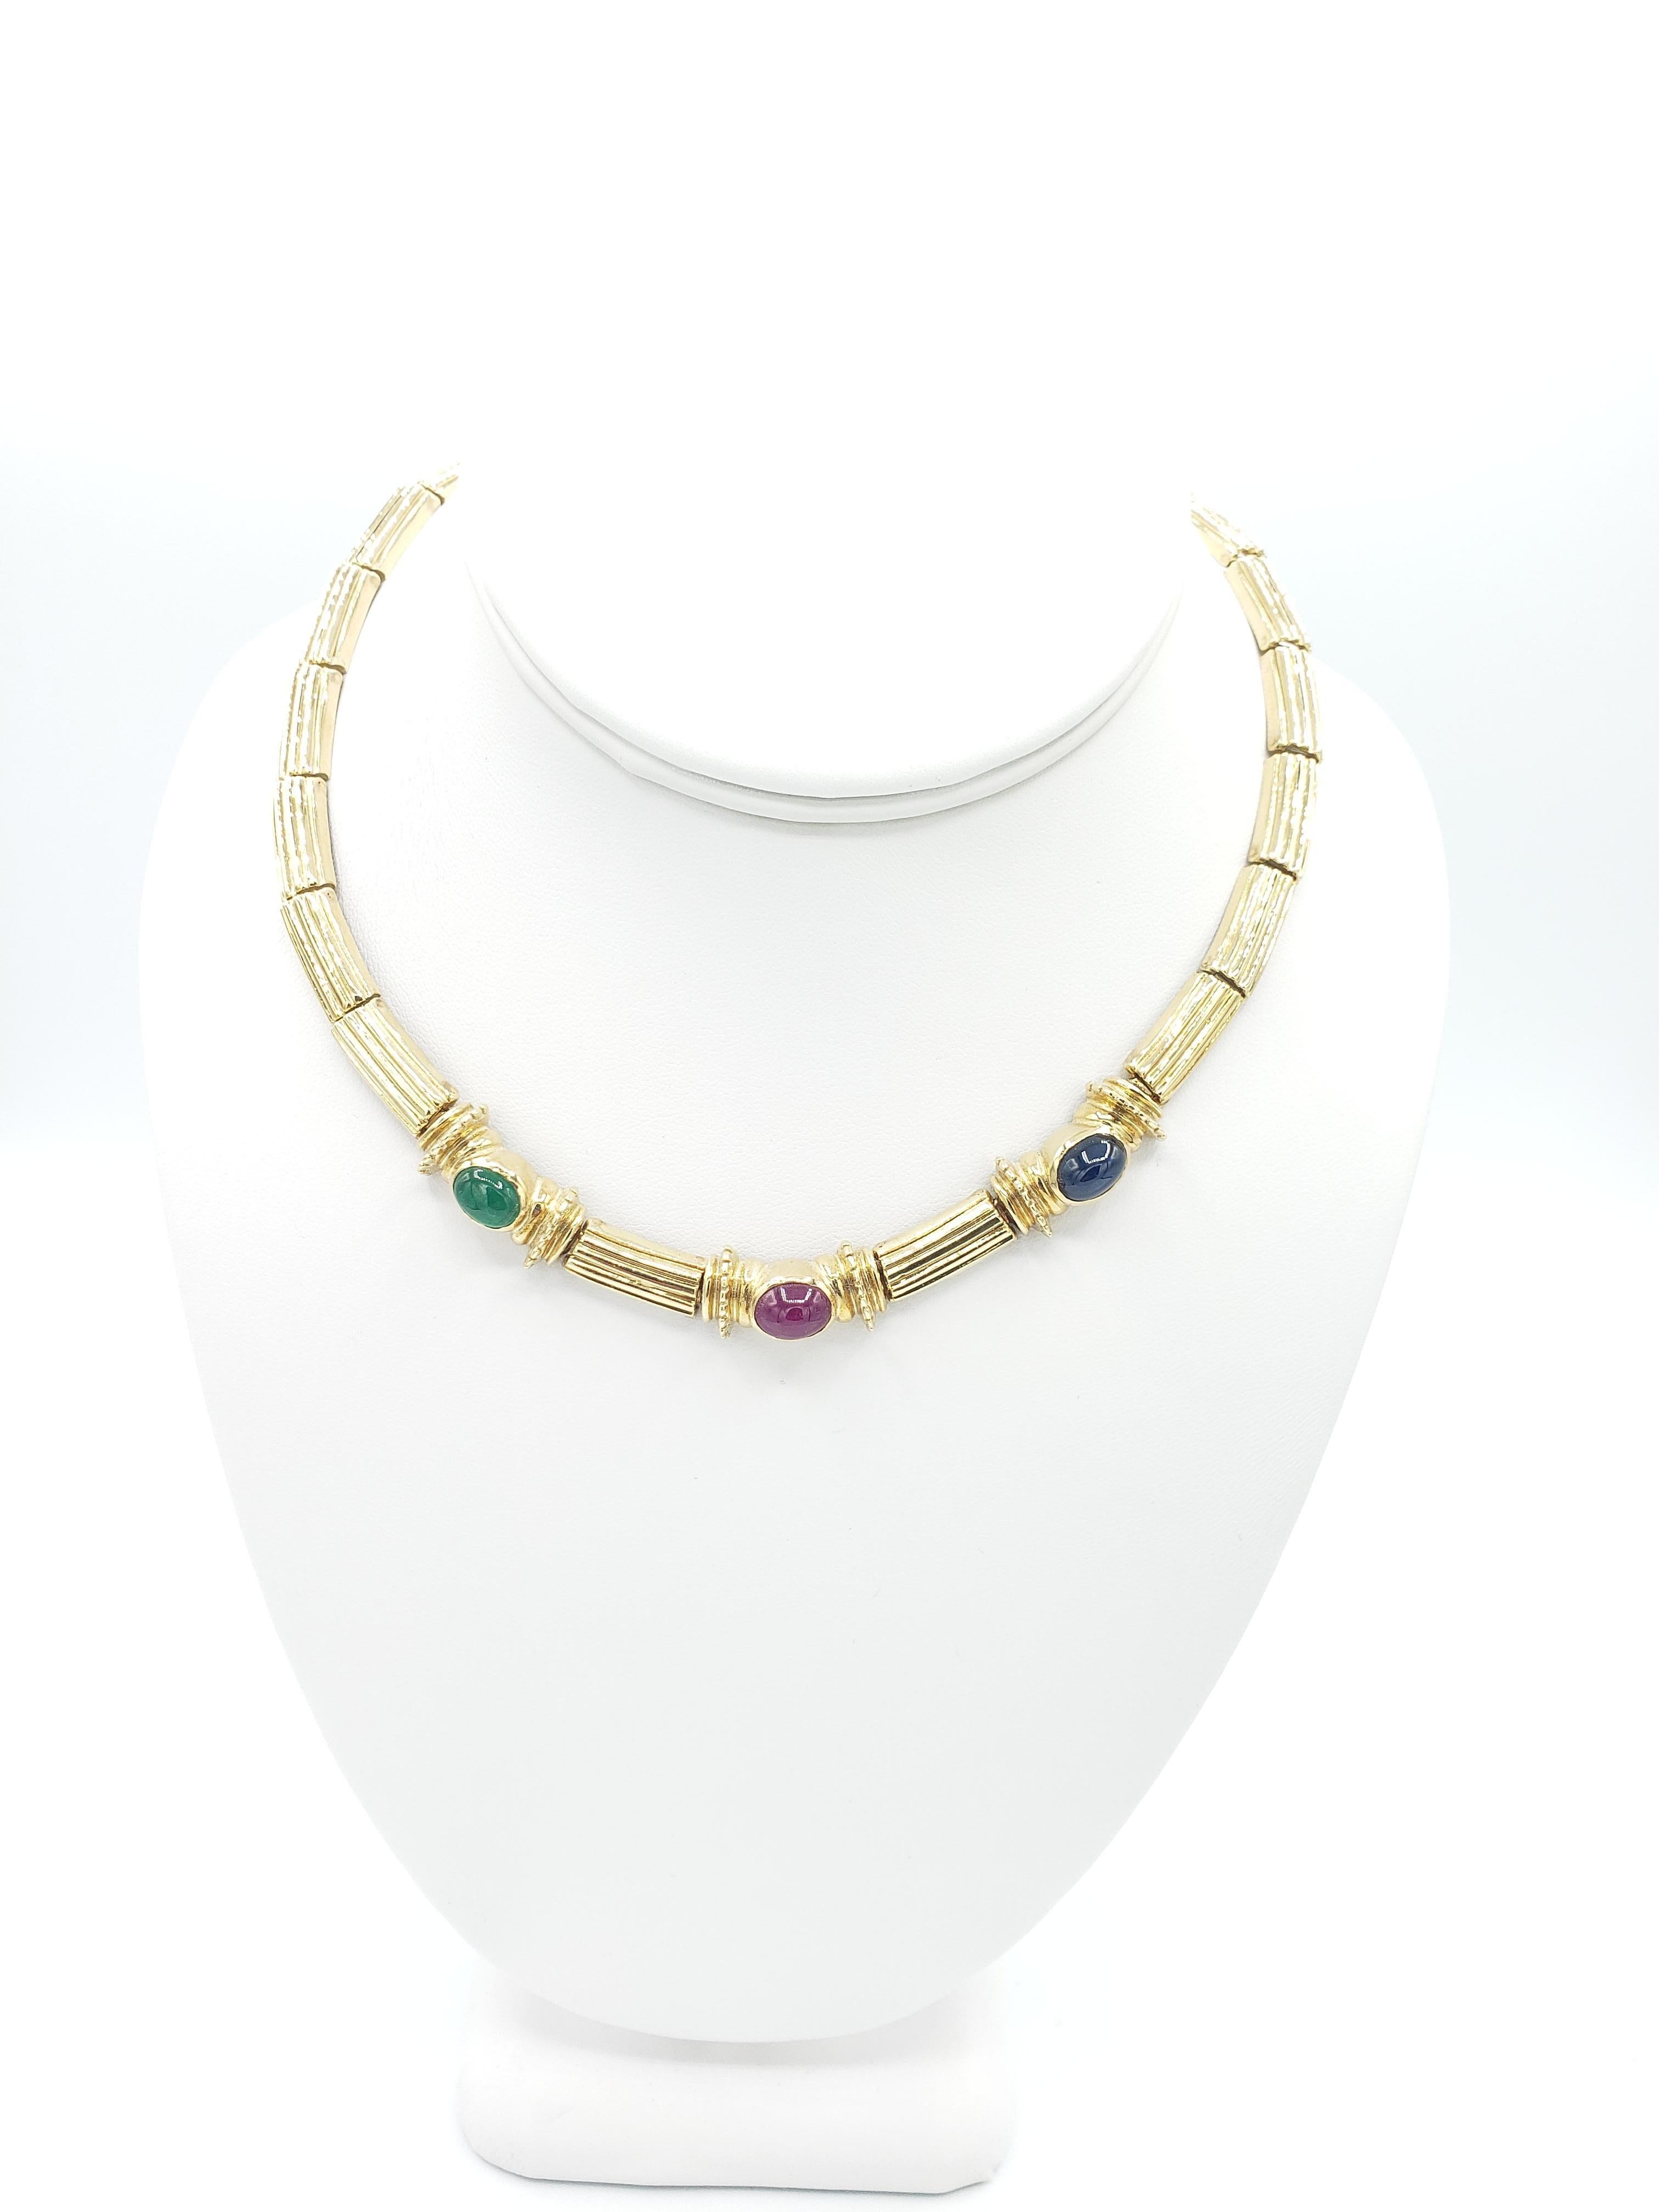 Add a touch of luxury to your jewelry collection with this exquisite necklace from LaFrancee. Crafted from 14k solid yellow gold, this piece features three natural precious gemstones in oval shape - ruby, sapphire, and emerald. The Byzantine style